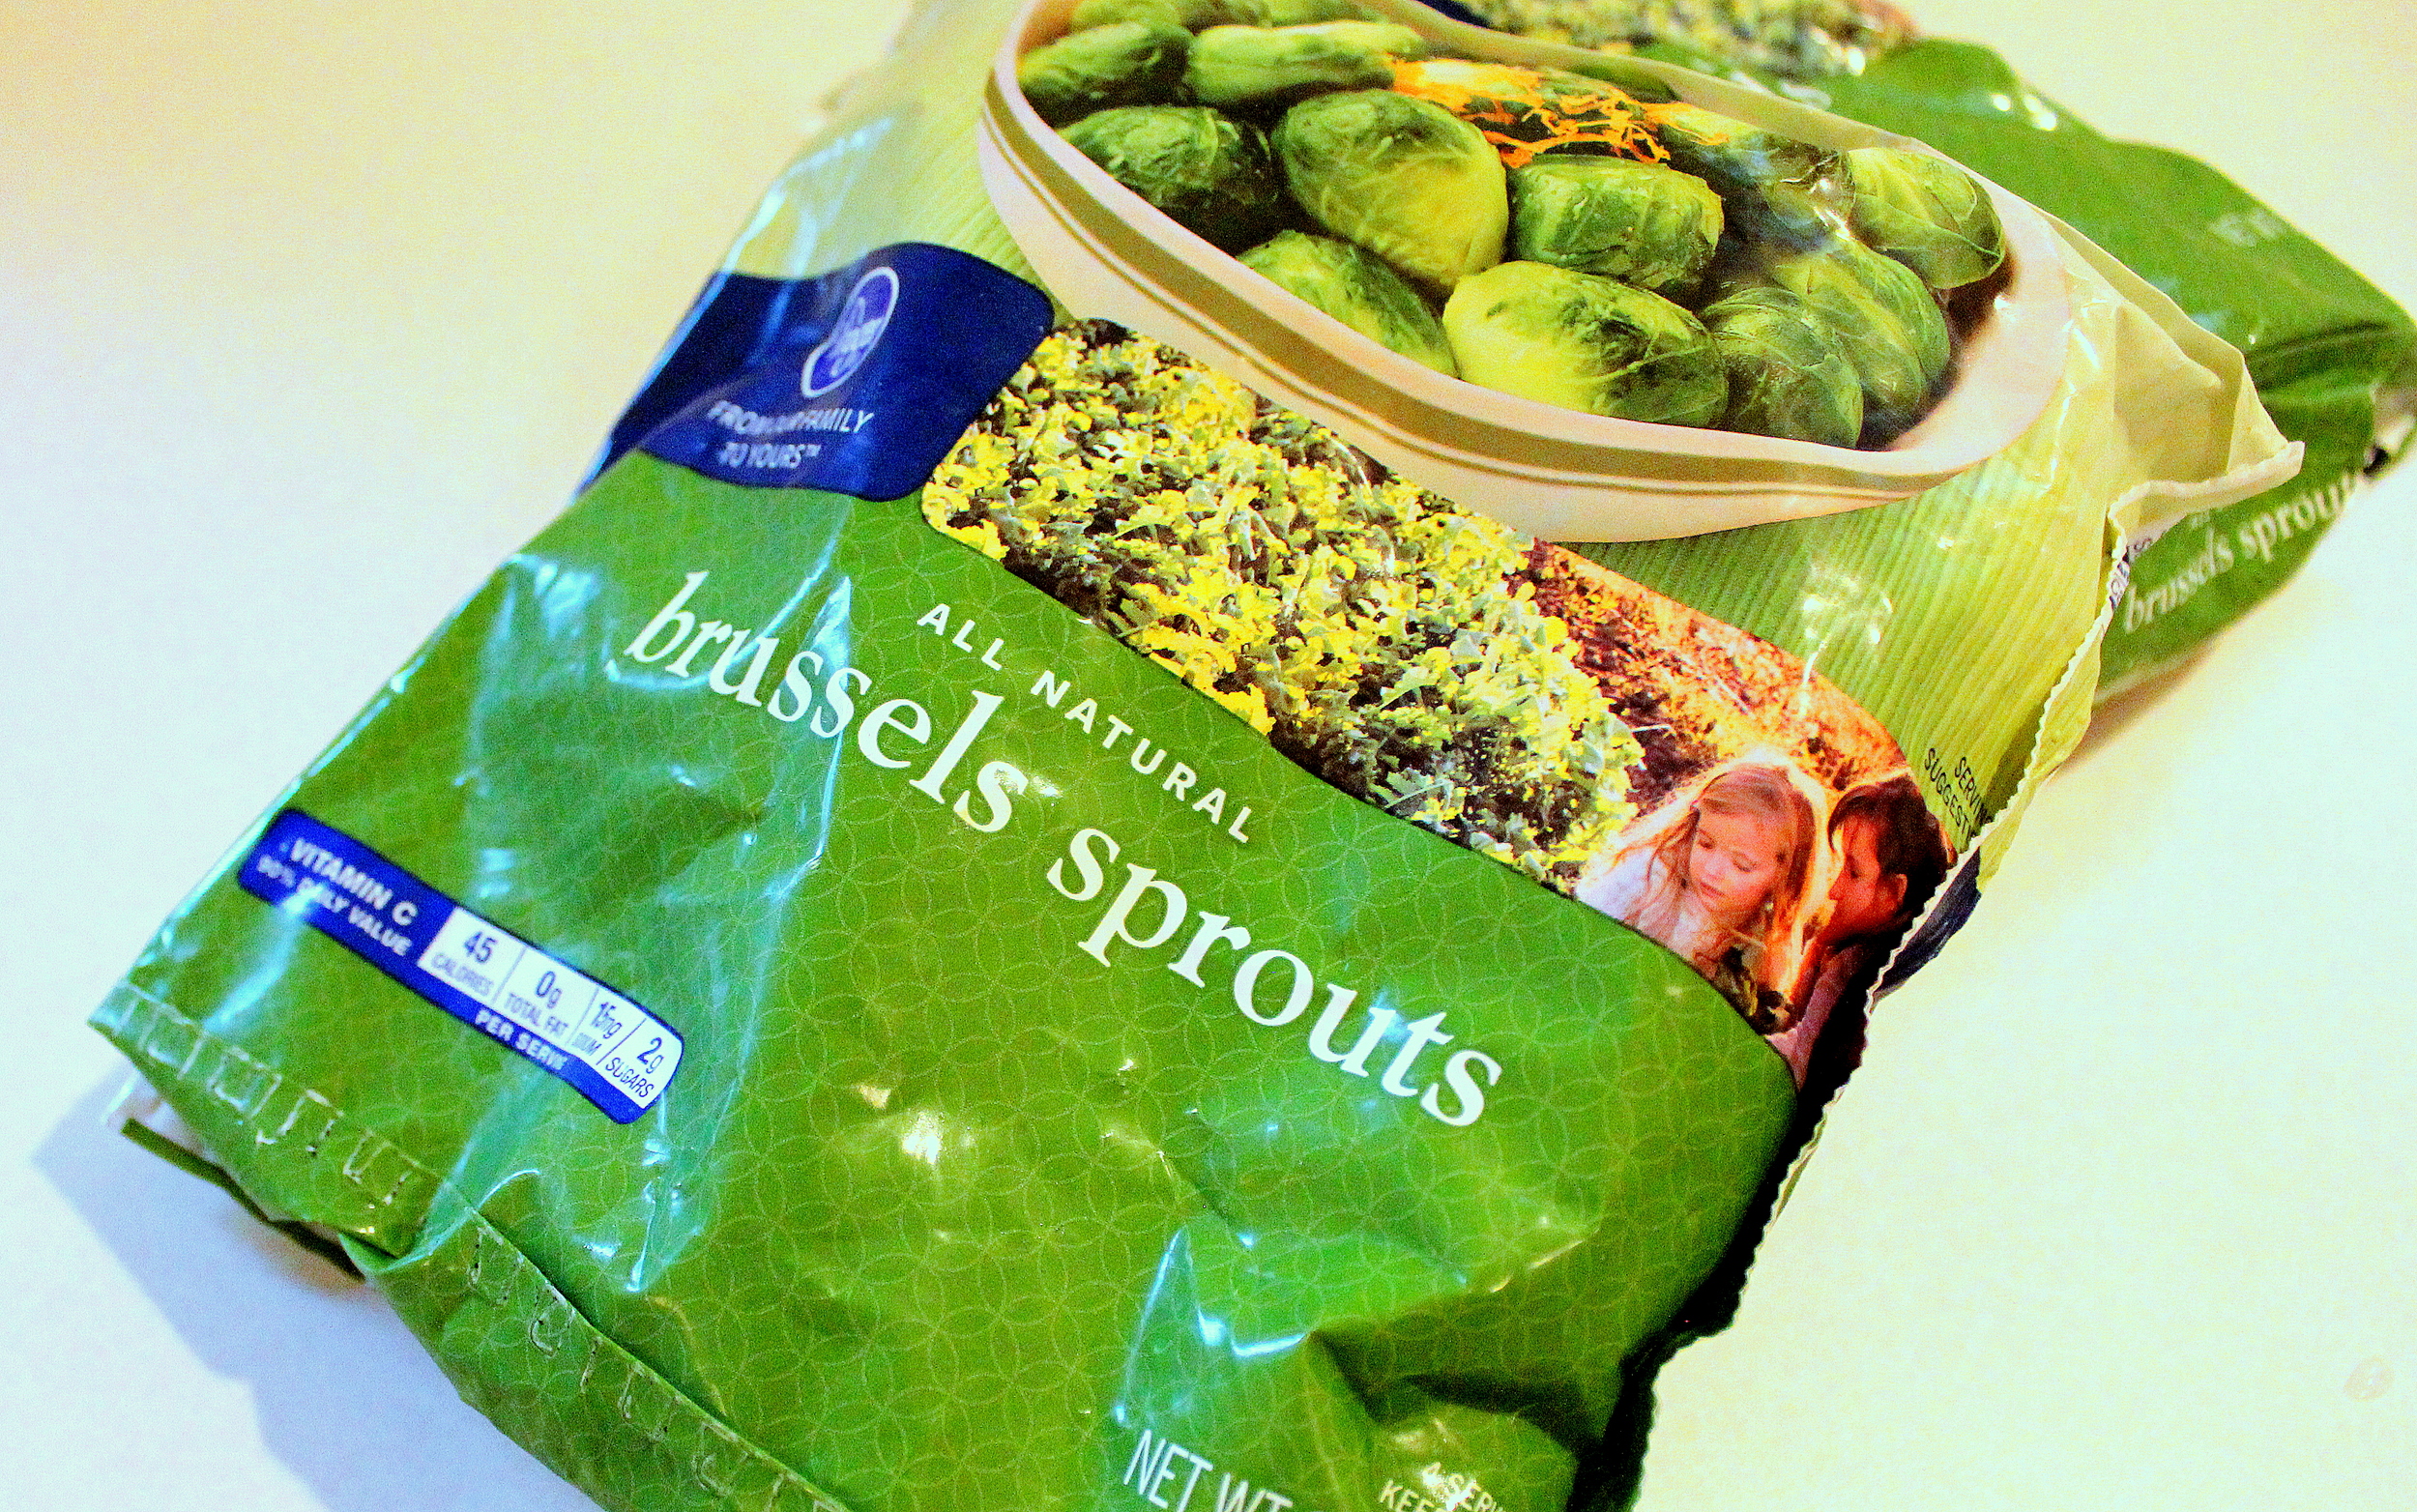 Easy Sauteed Brussels Sprouts from Peas and Hoppiness